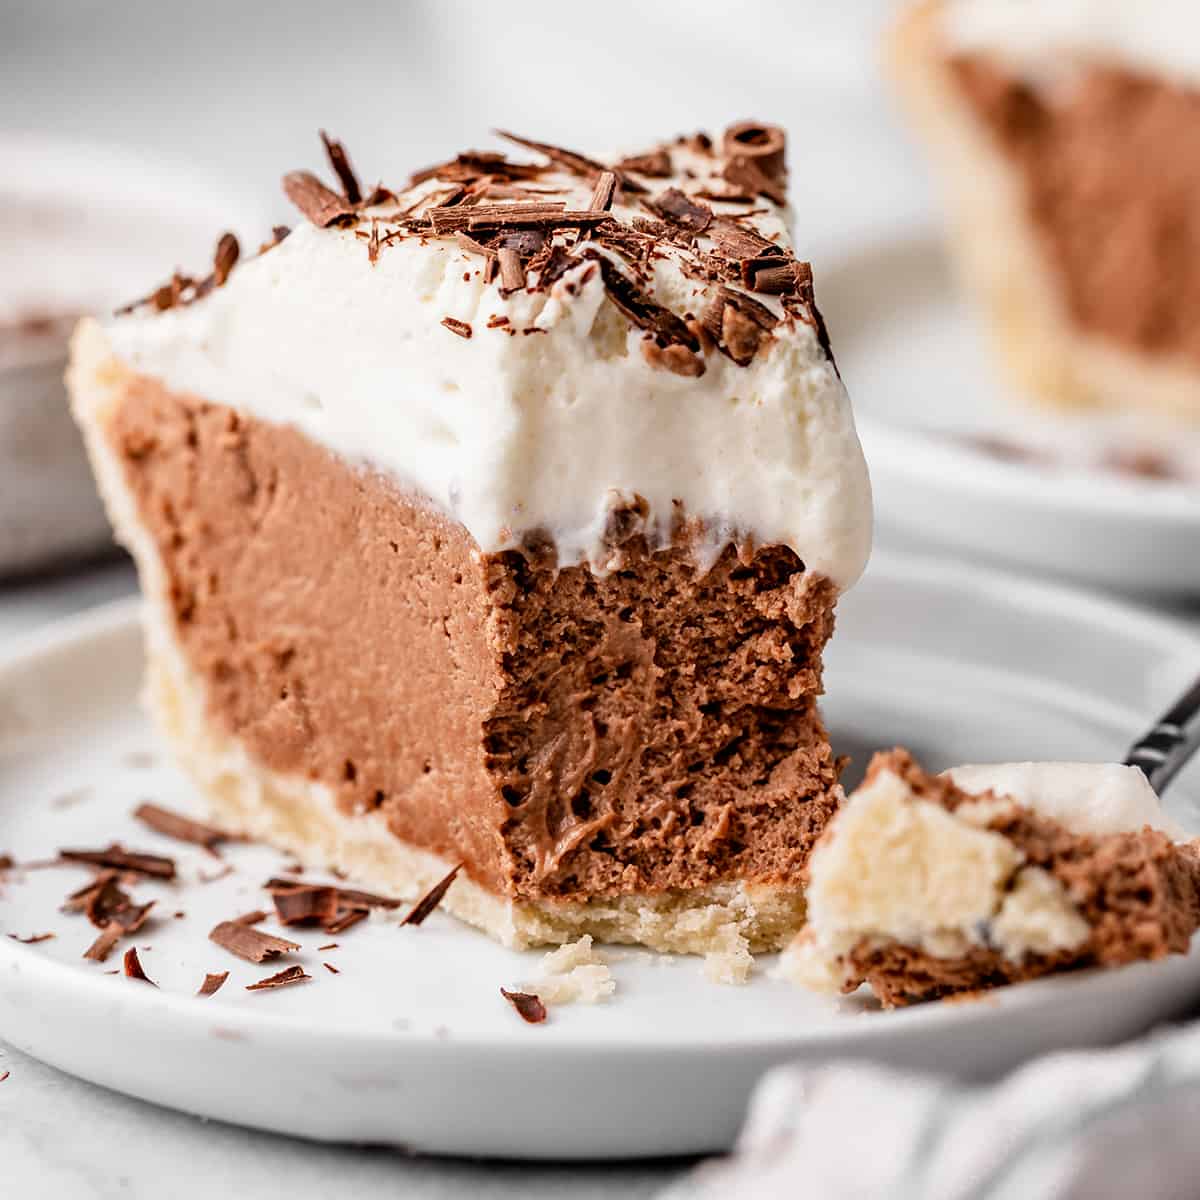 French Silk Pie on a plate with a bite taken out of it